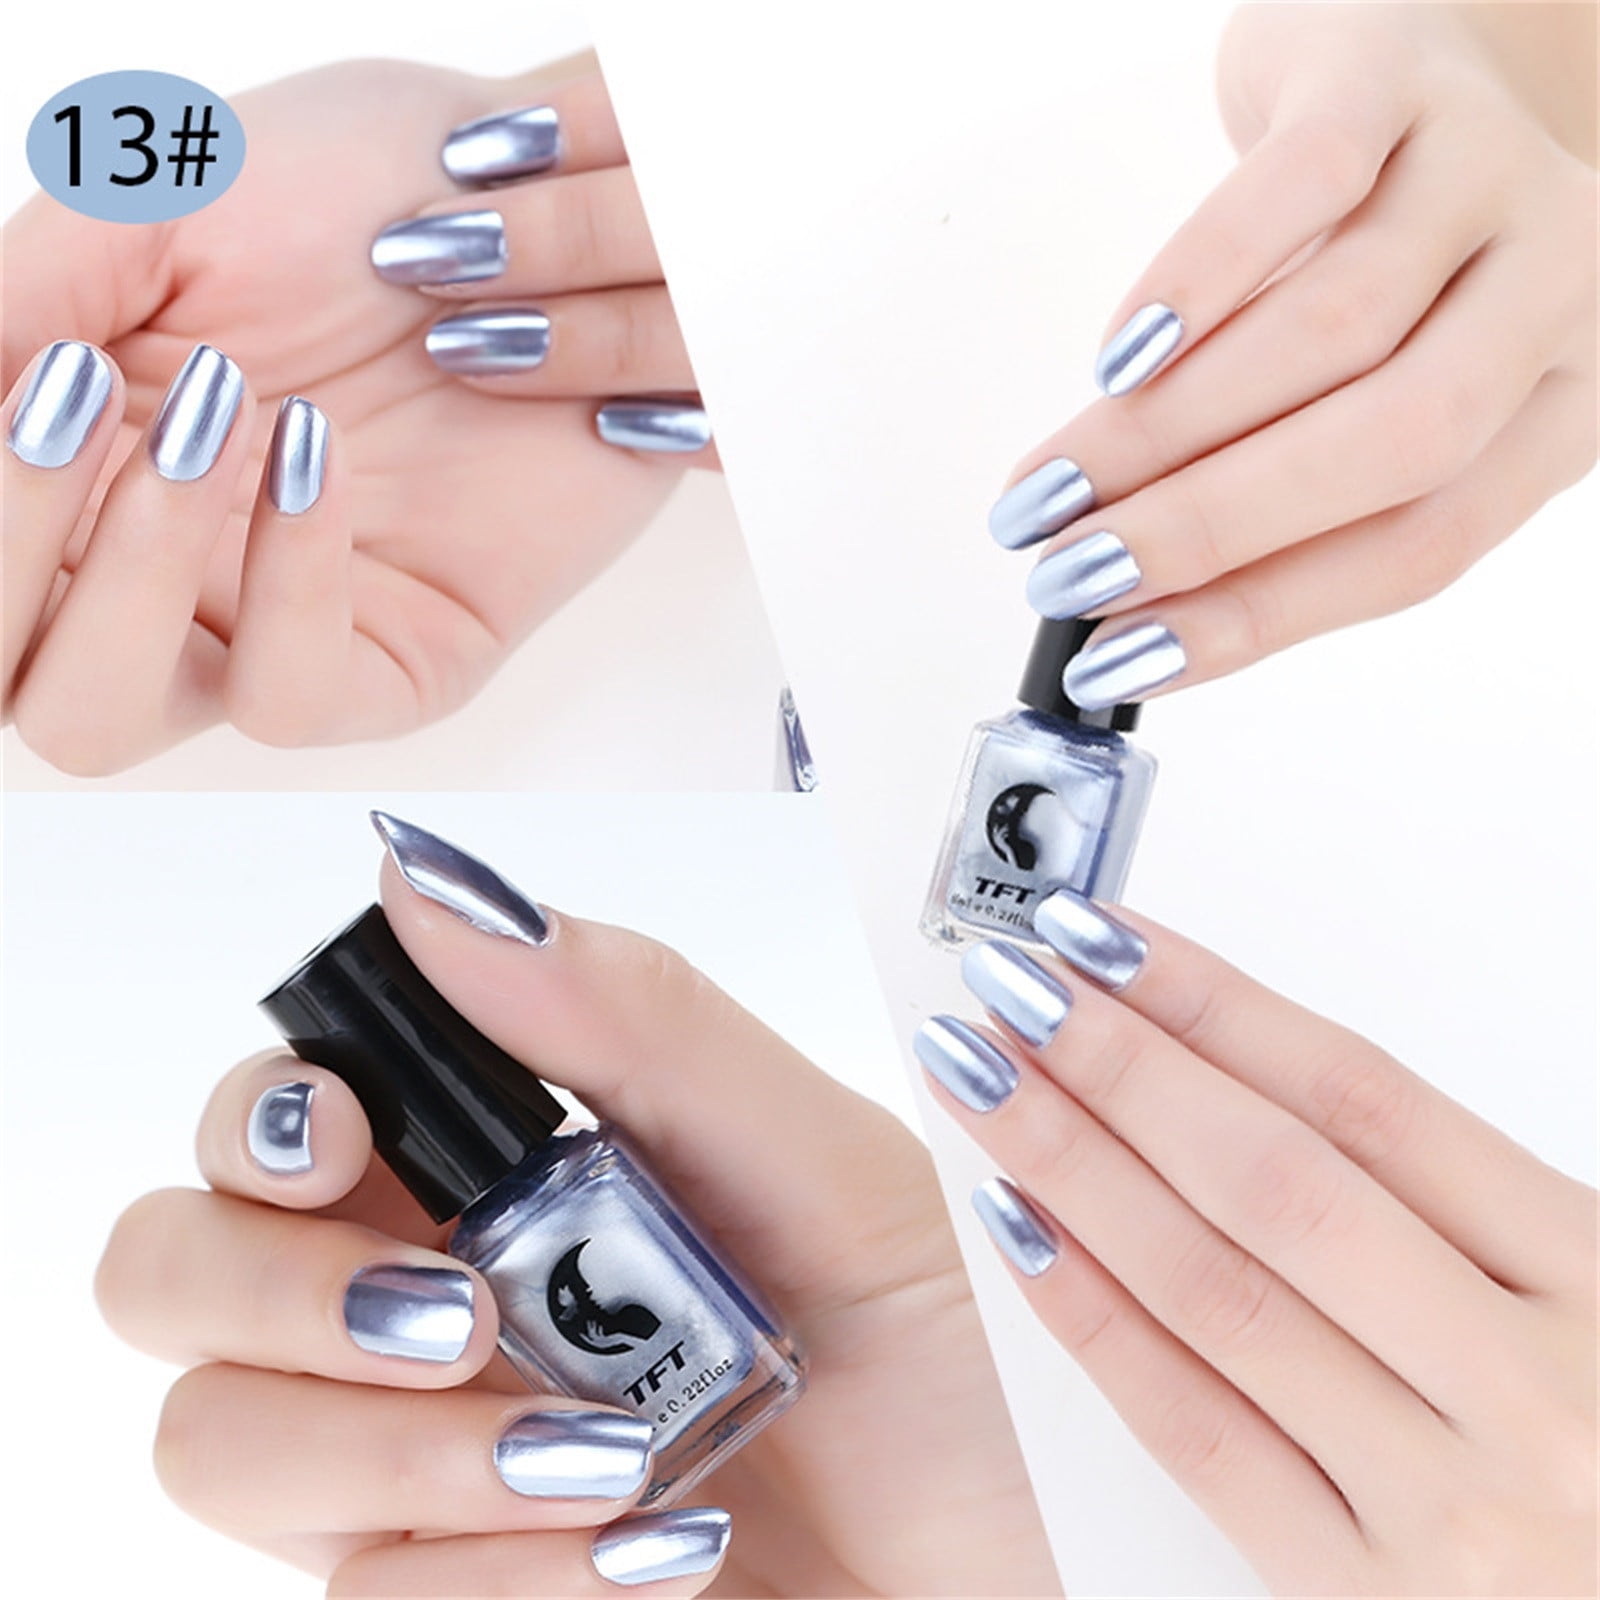 Juebong TFT Metallic Stainless Steel Mirror Silver Nail Polish 17 Colors  6ML, Multicolor 